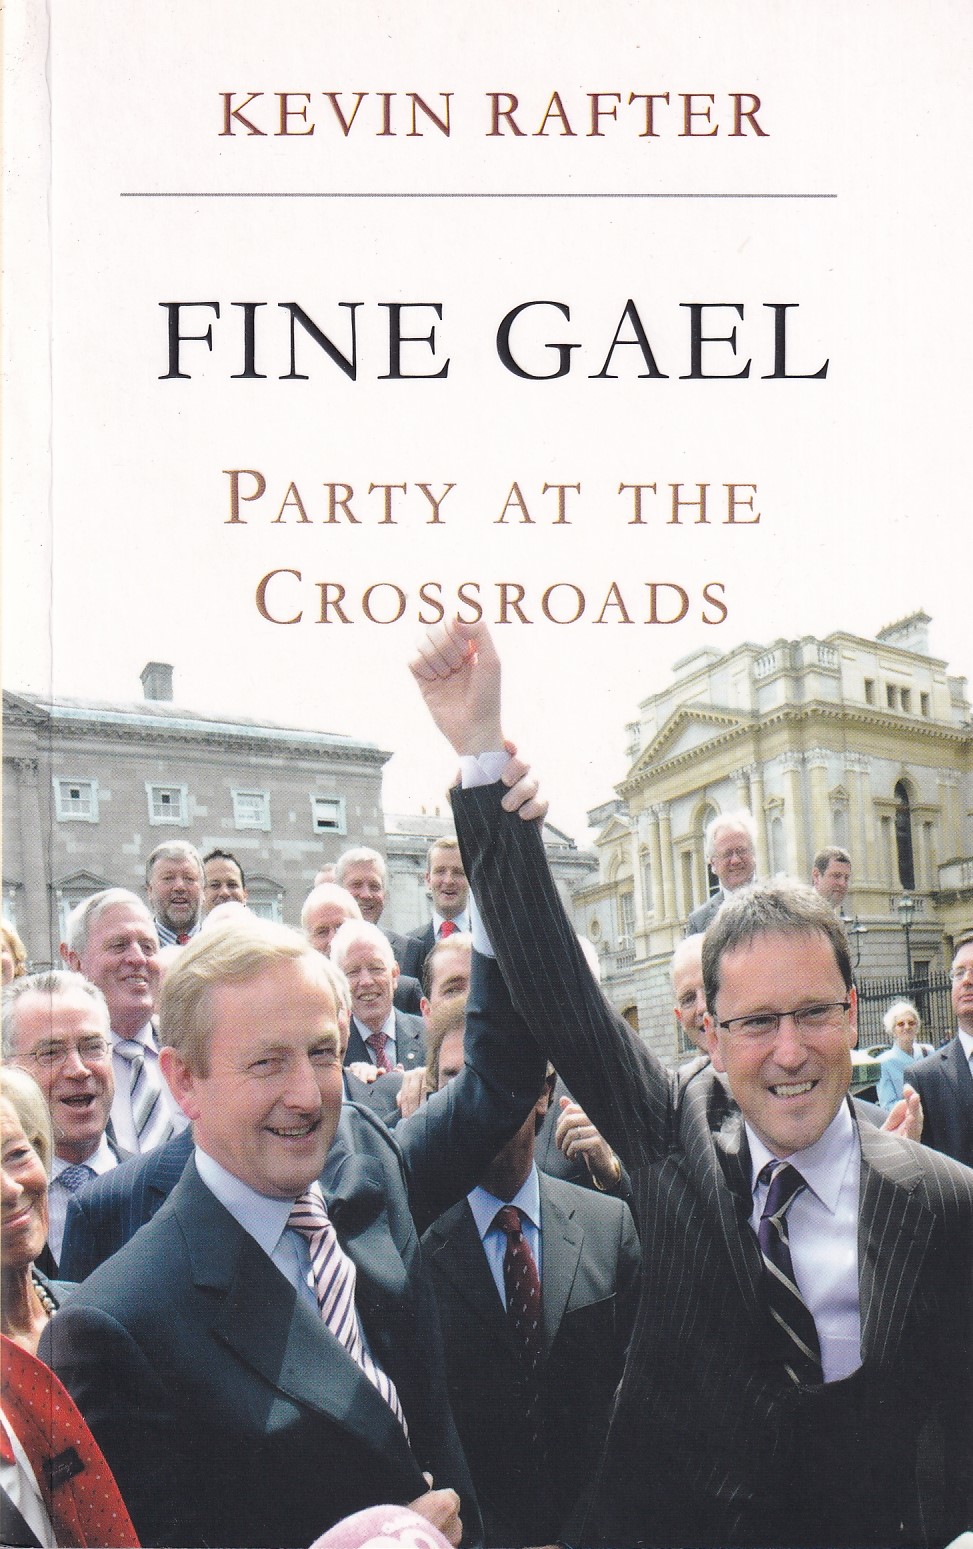 Fine Gael: Party at the Crossroads | Kevin Rafter | Charlie Byrne's